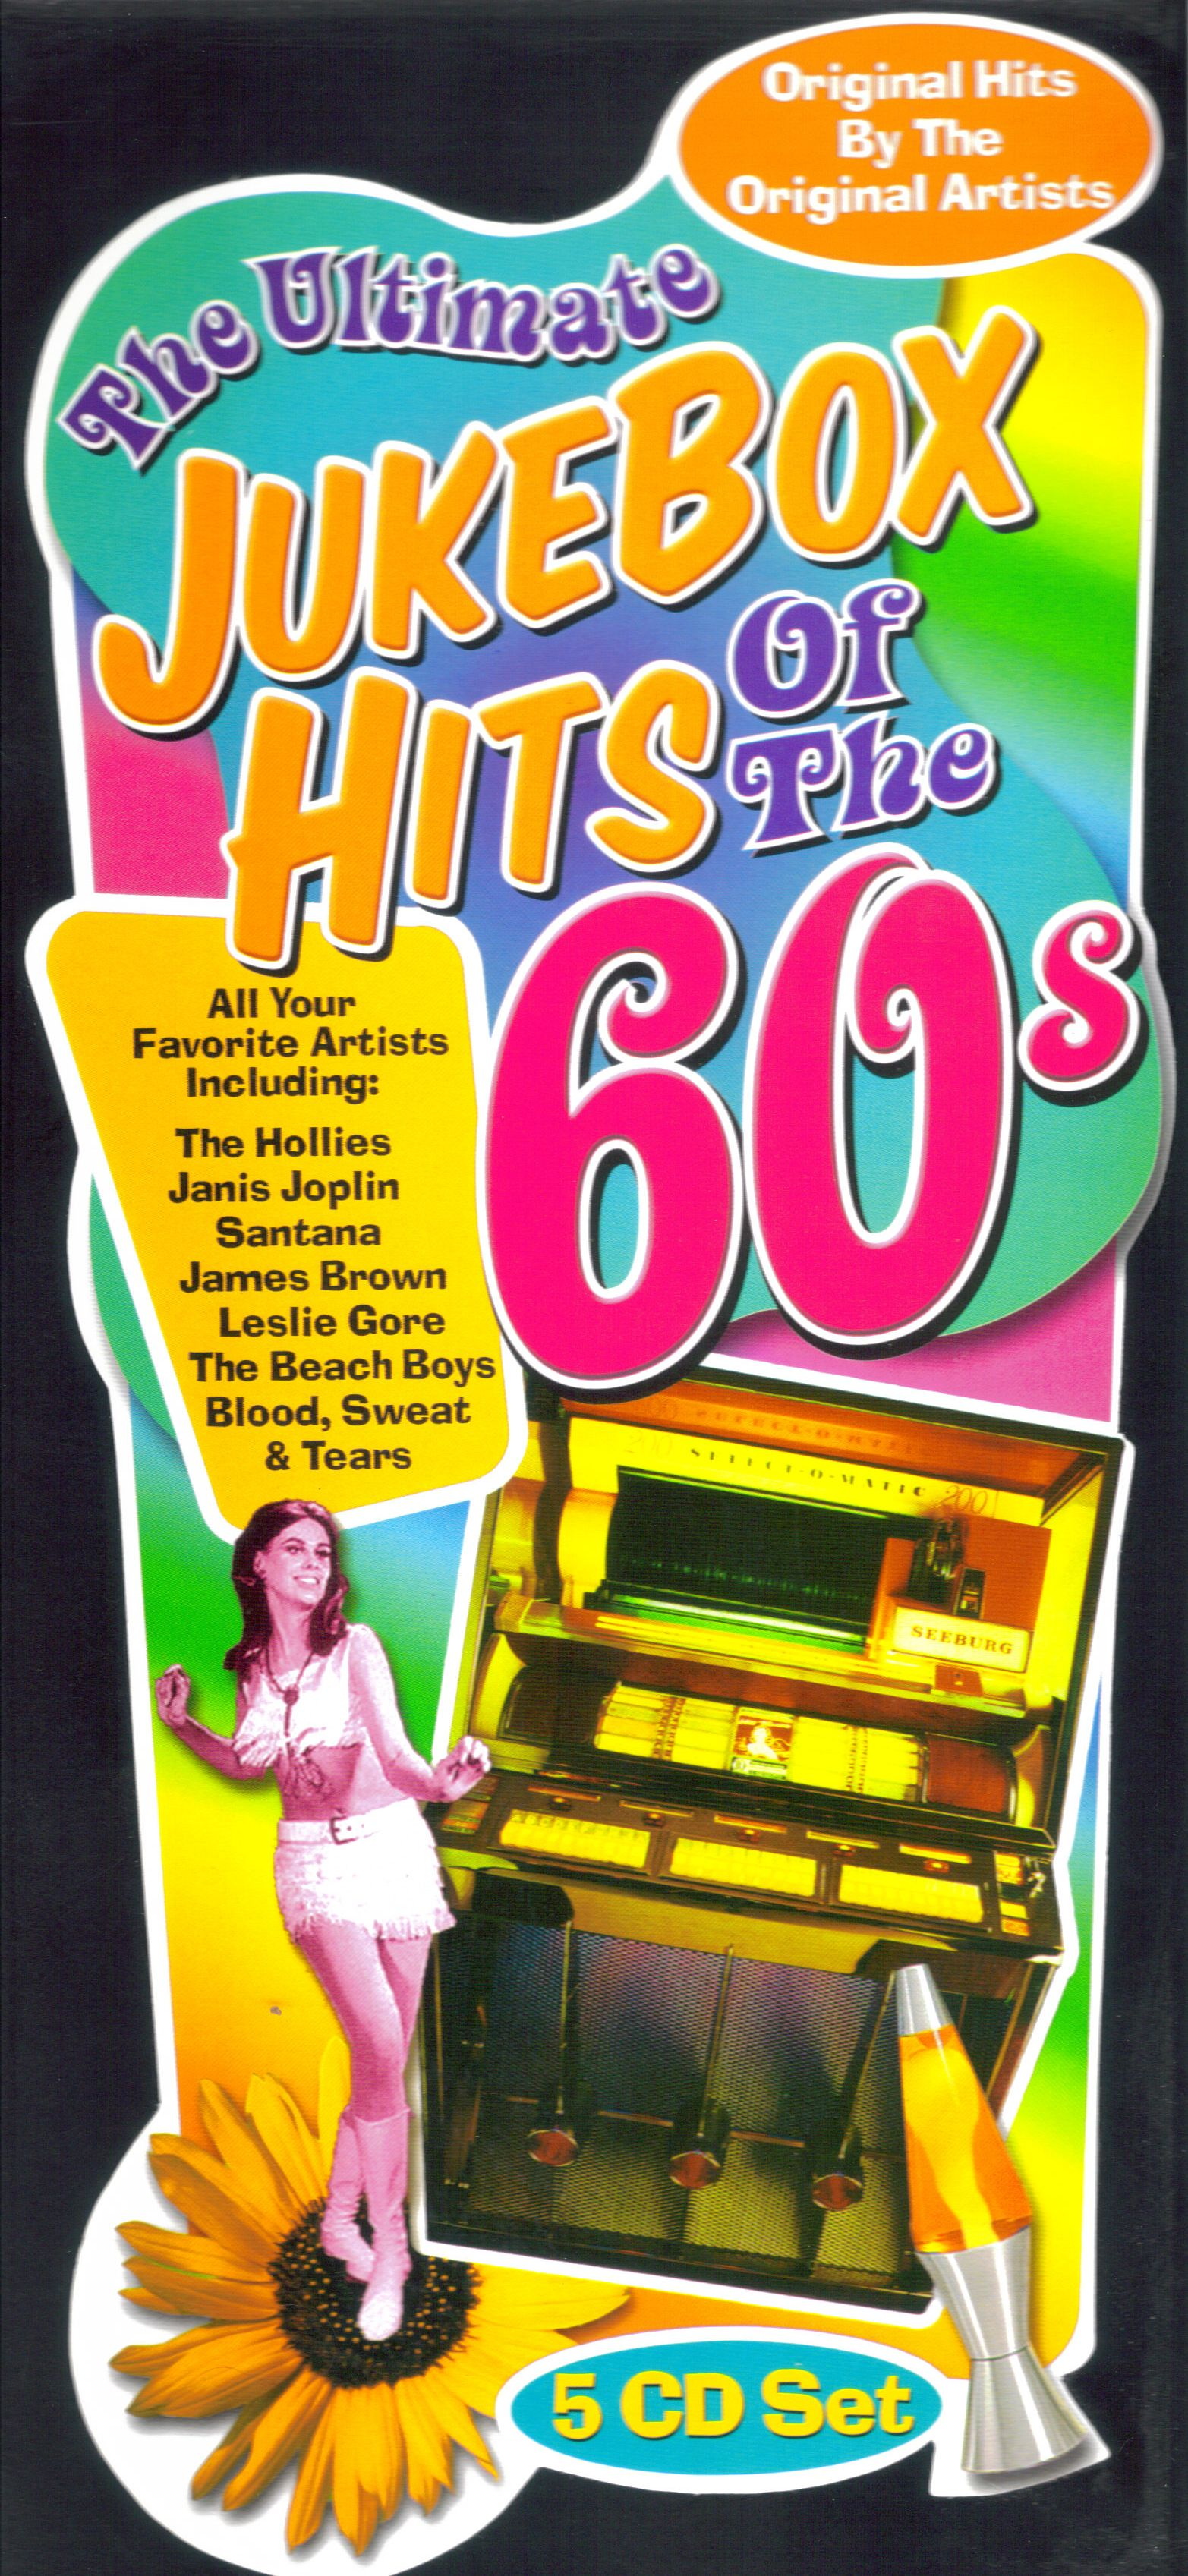 VA - The Ultimate Jukebox Hits Of The 60’s (2002) [FLAC]